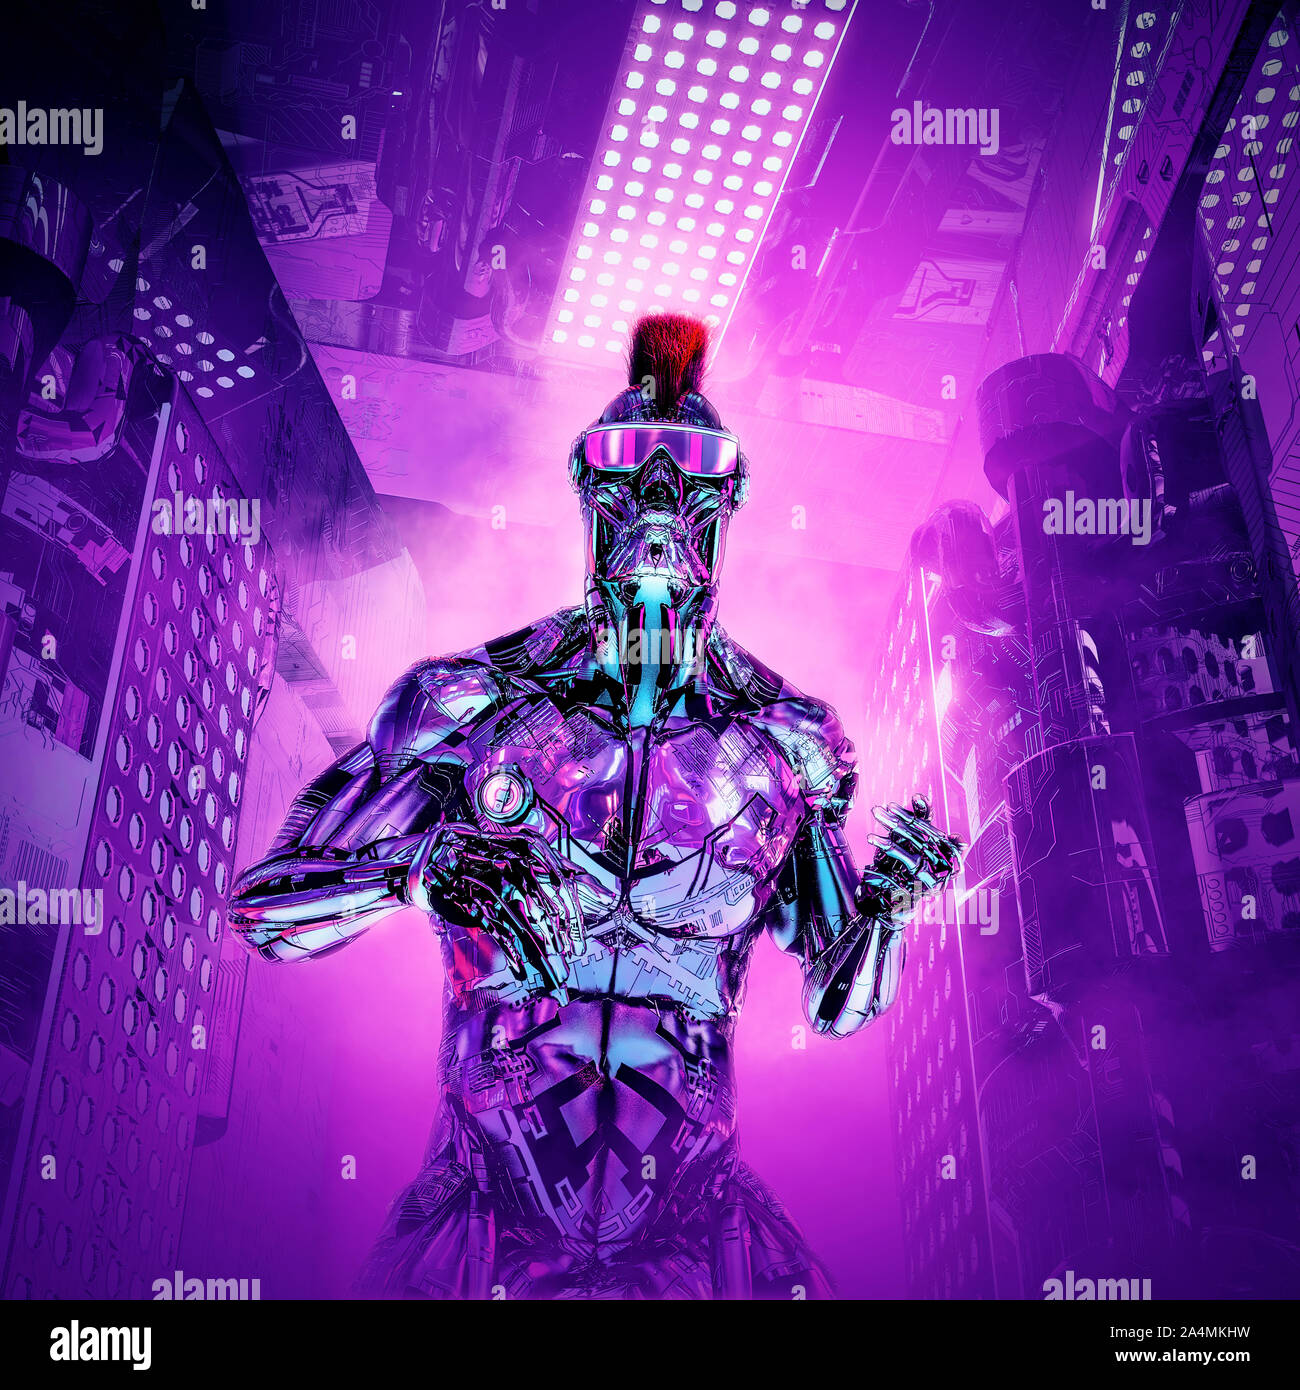 The artificial boy returns / 3D illustration of futuristic metallic science  fiction male humanoid cyborg with mohawk hairstyle and sunglasses Stock  Photo - Alamy